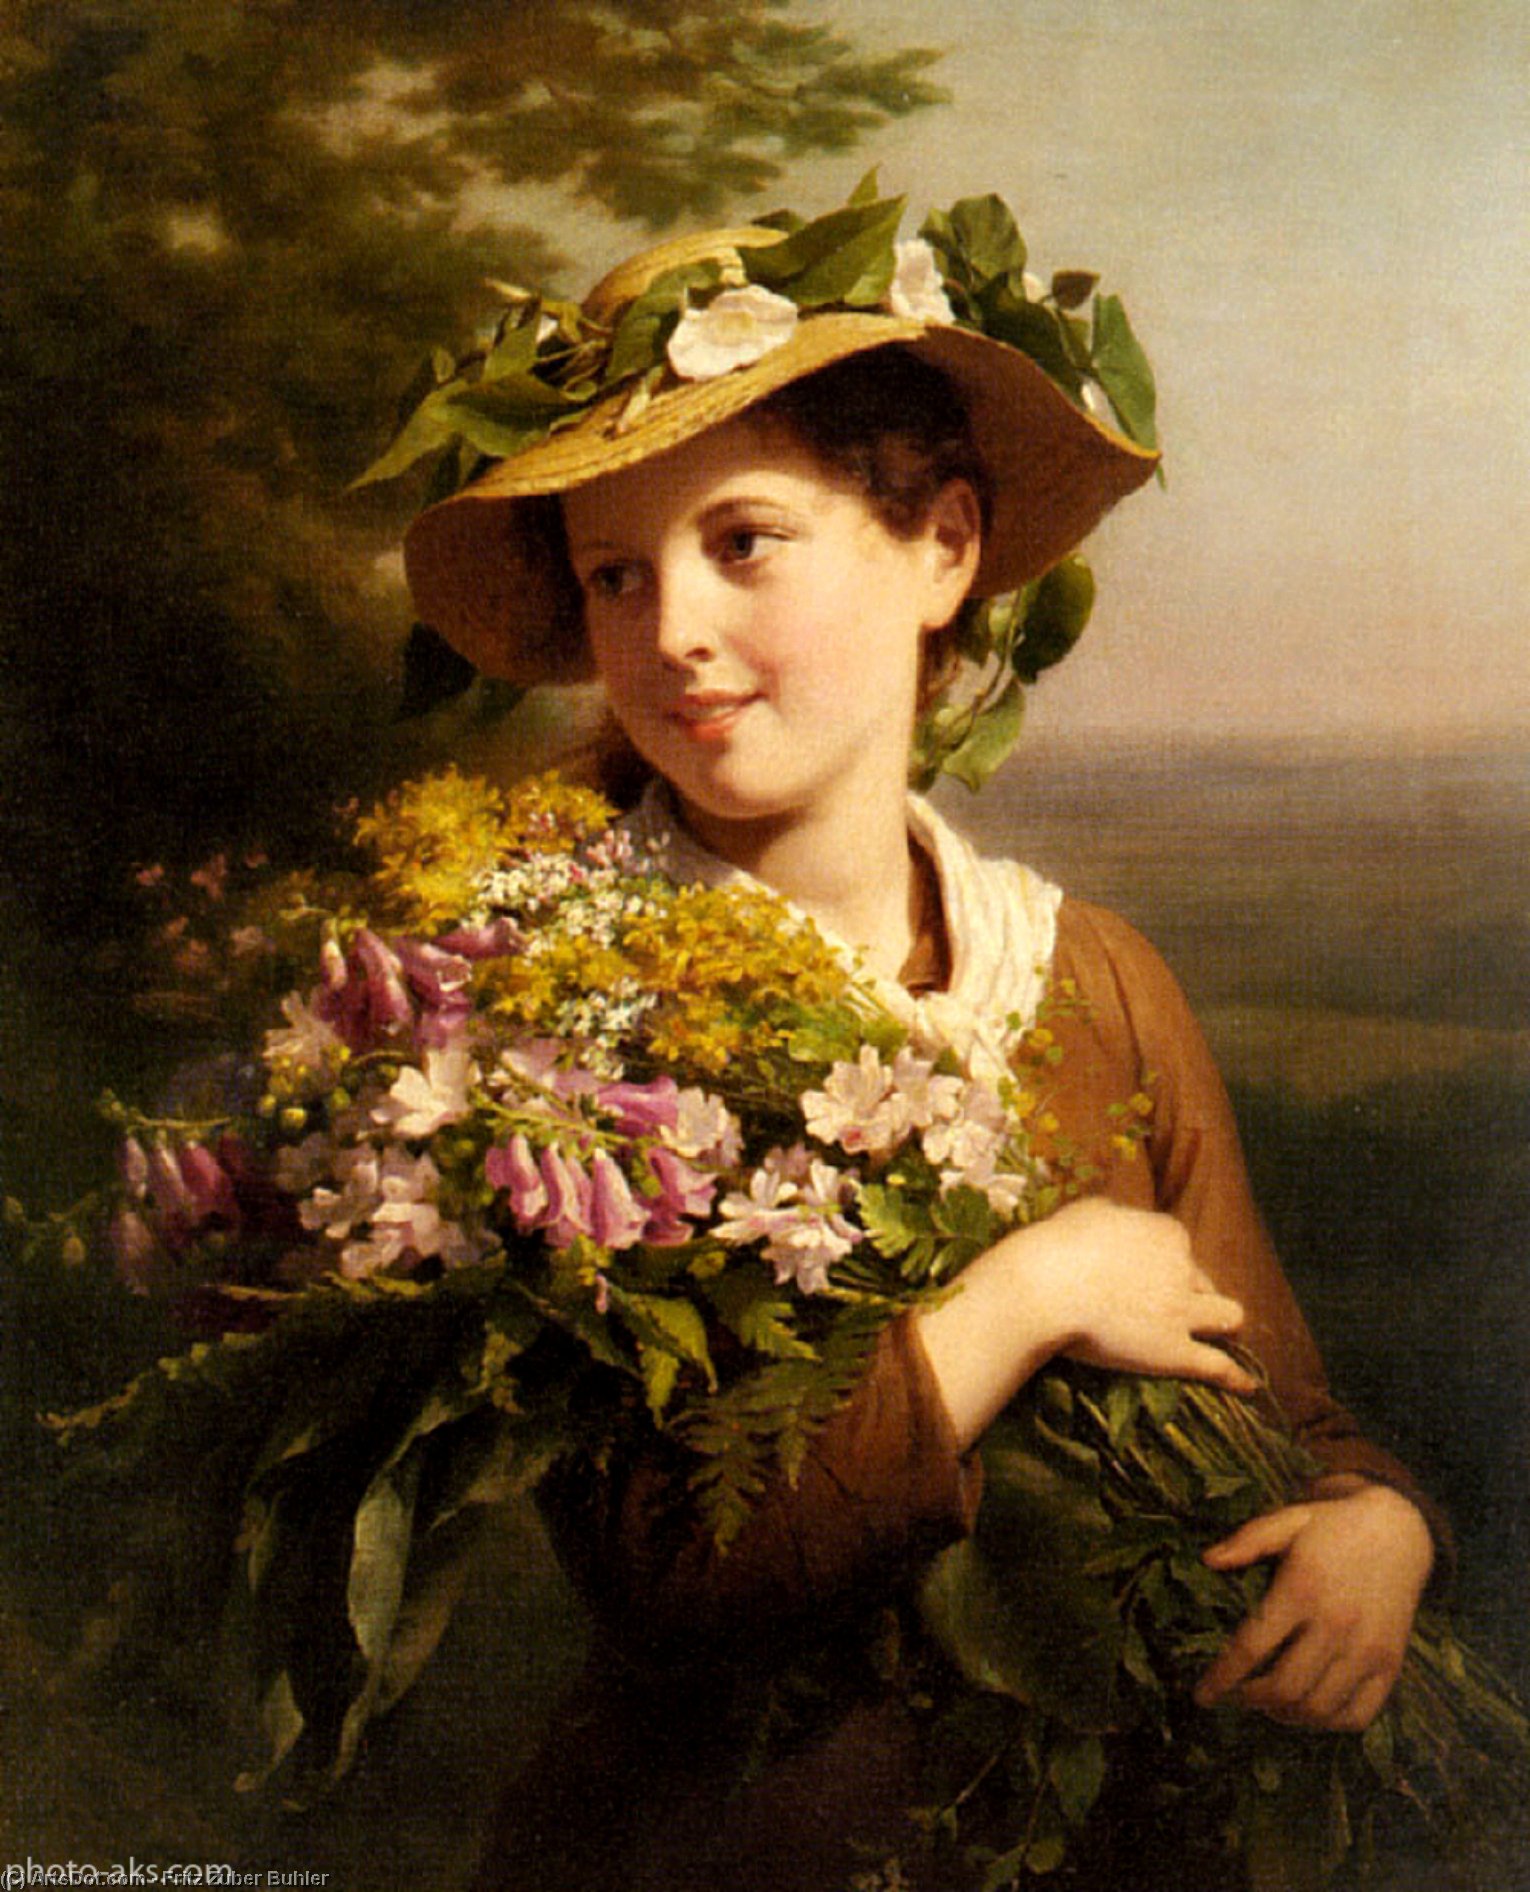 WikiOO.org - 백과 사전 - 회화, 삽화 Fritz Zuber Buhler - A Young Beauty holding a Bouquet of Flowers